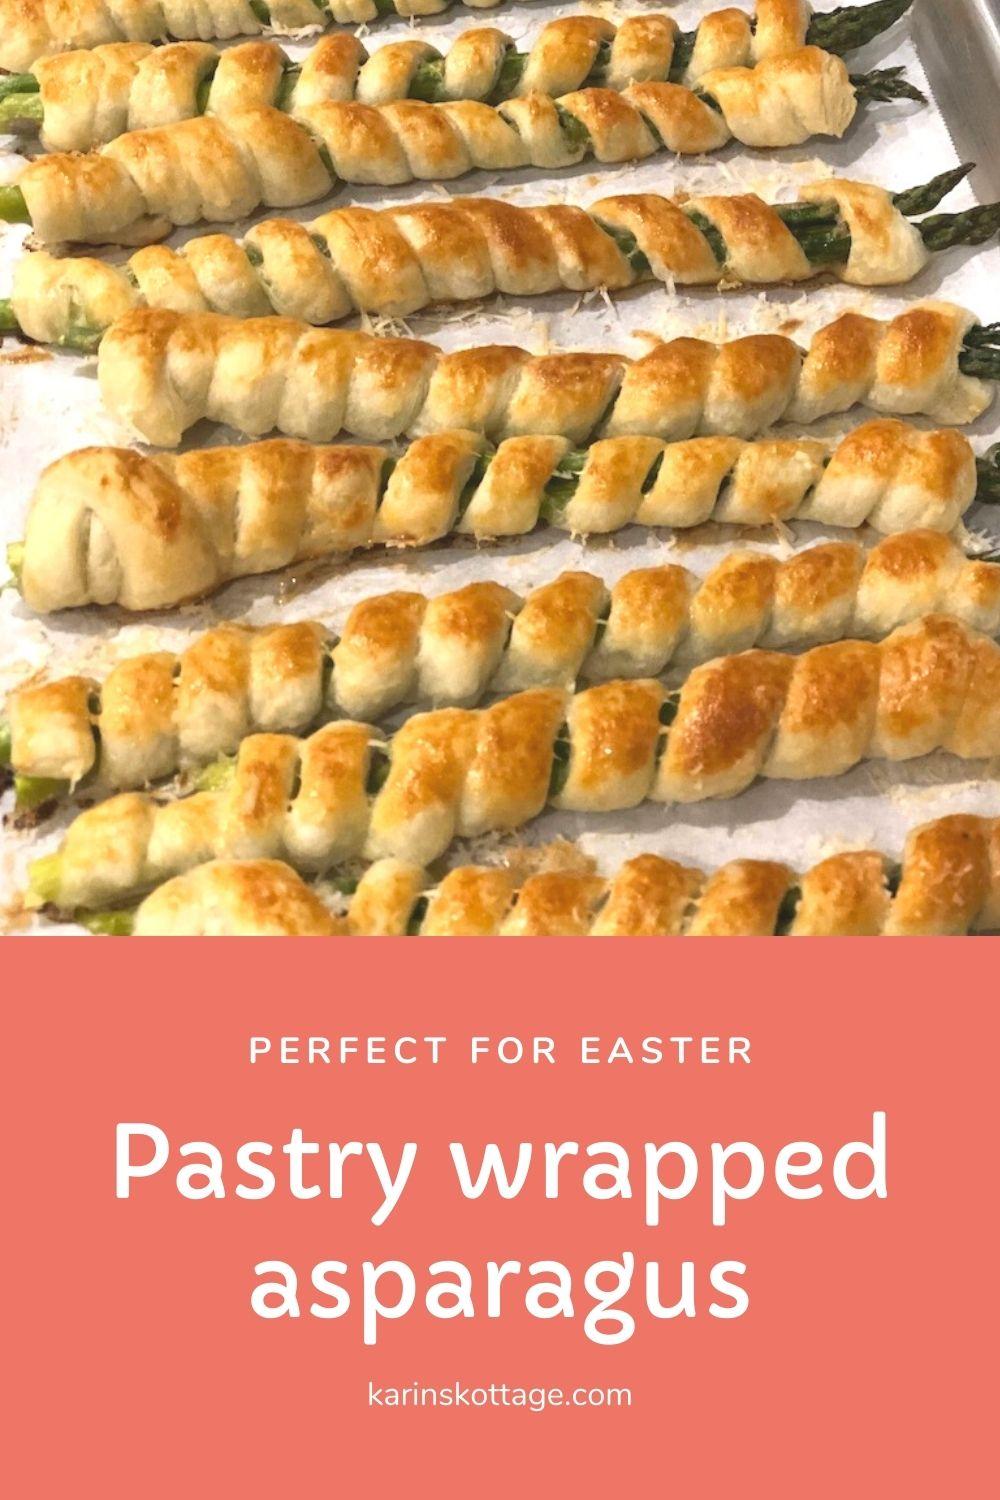 Pastry wrapped asparagus.jpg